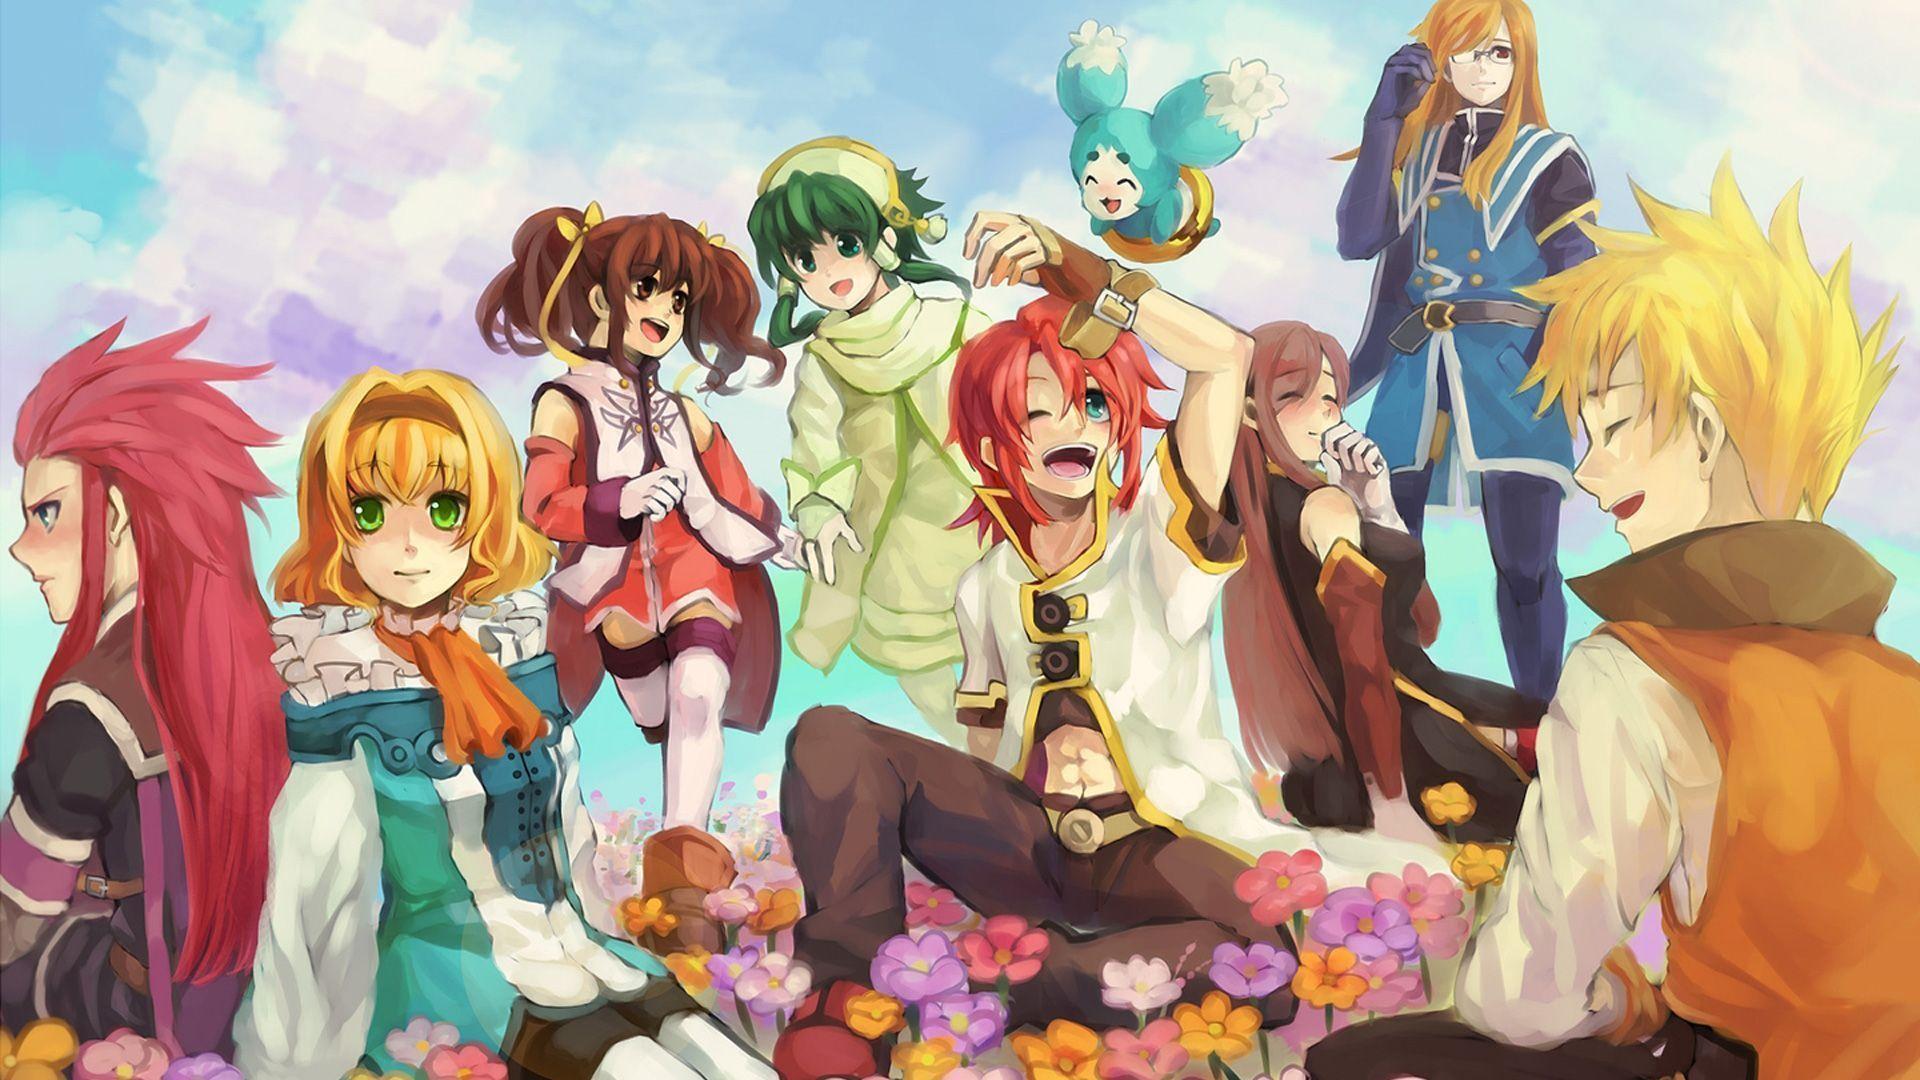 Free Tales of the Abyss Wallpaper in 1920x1080